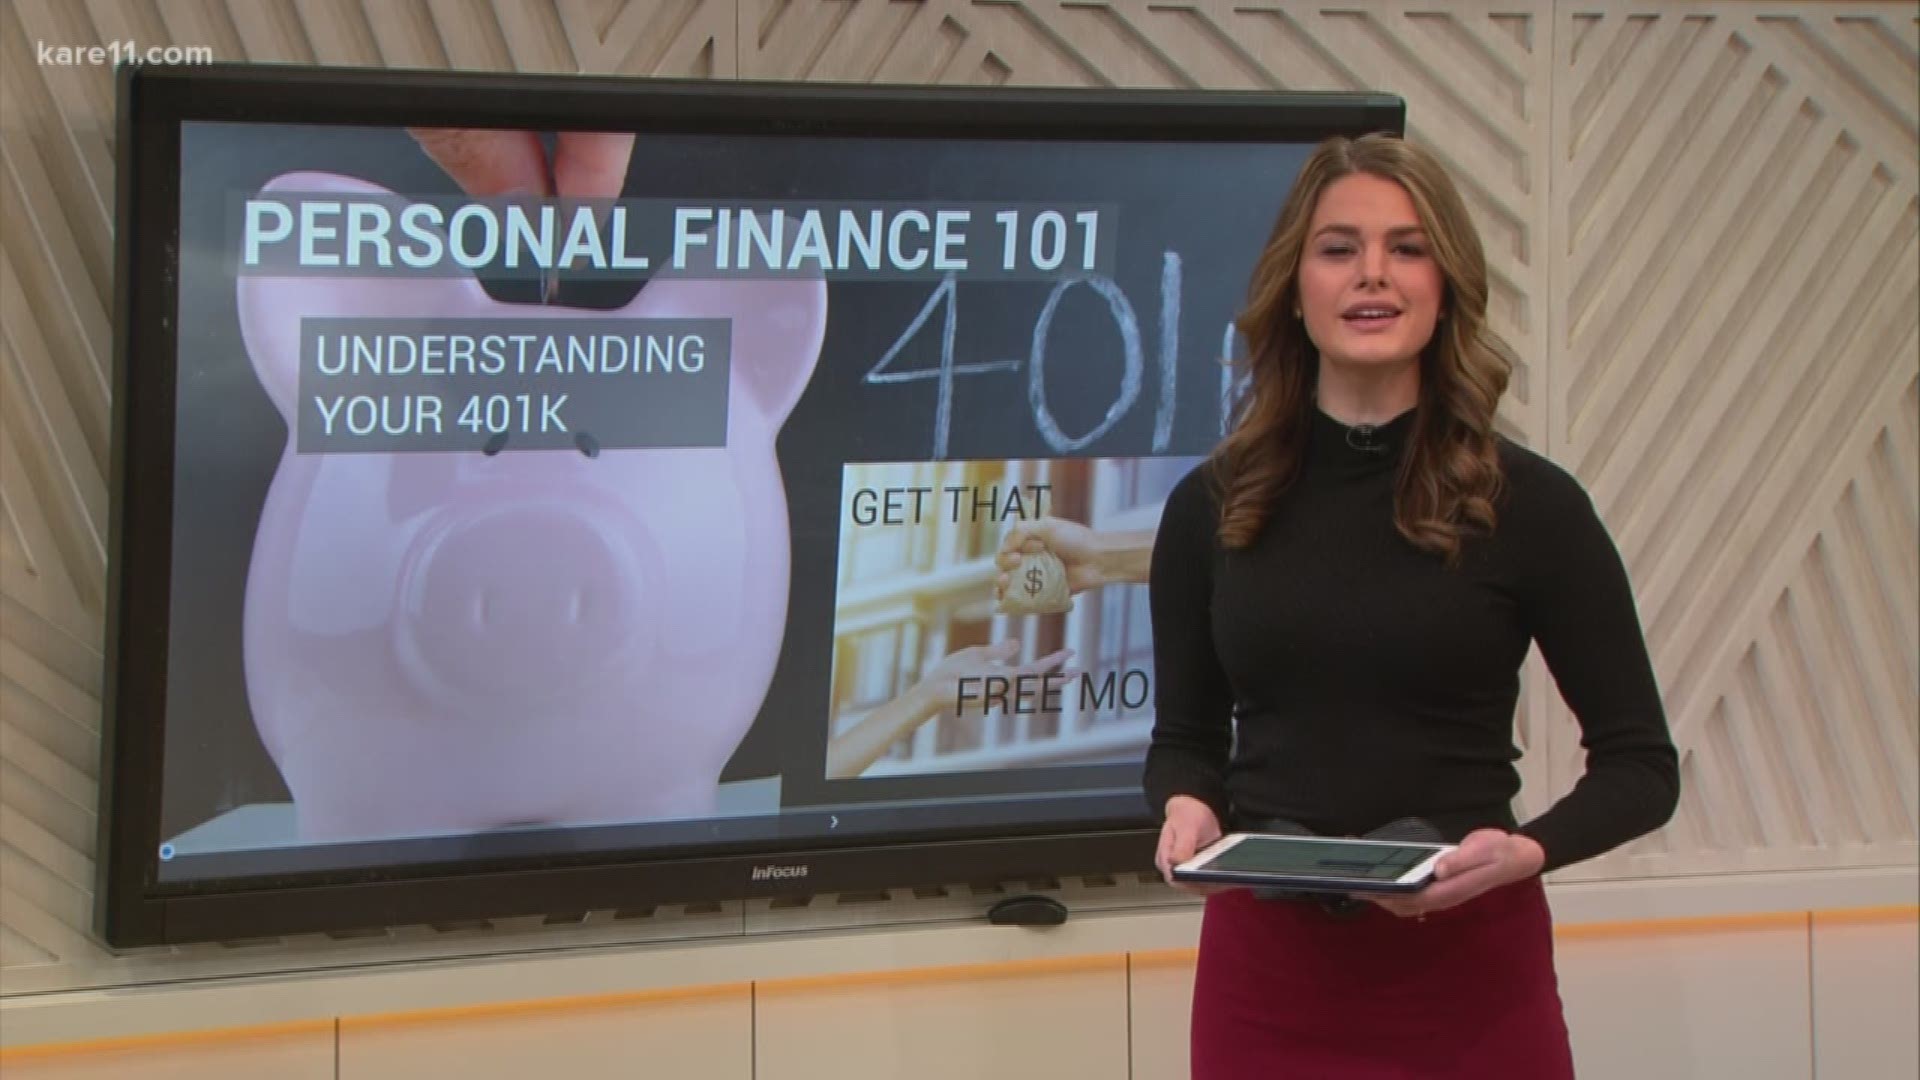 Alicia Lewis is breaking down some tough financial topics. First up: the 401(k).